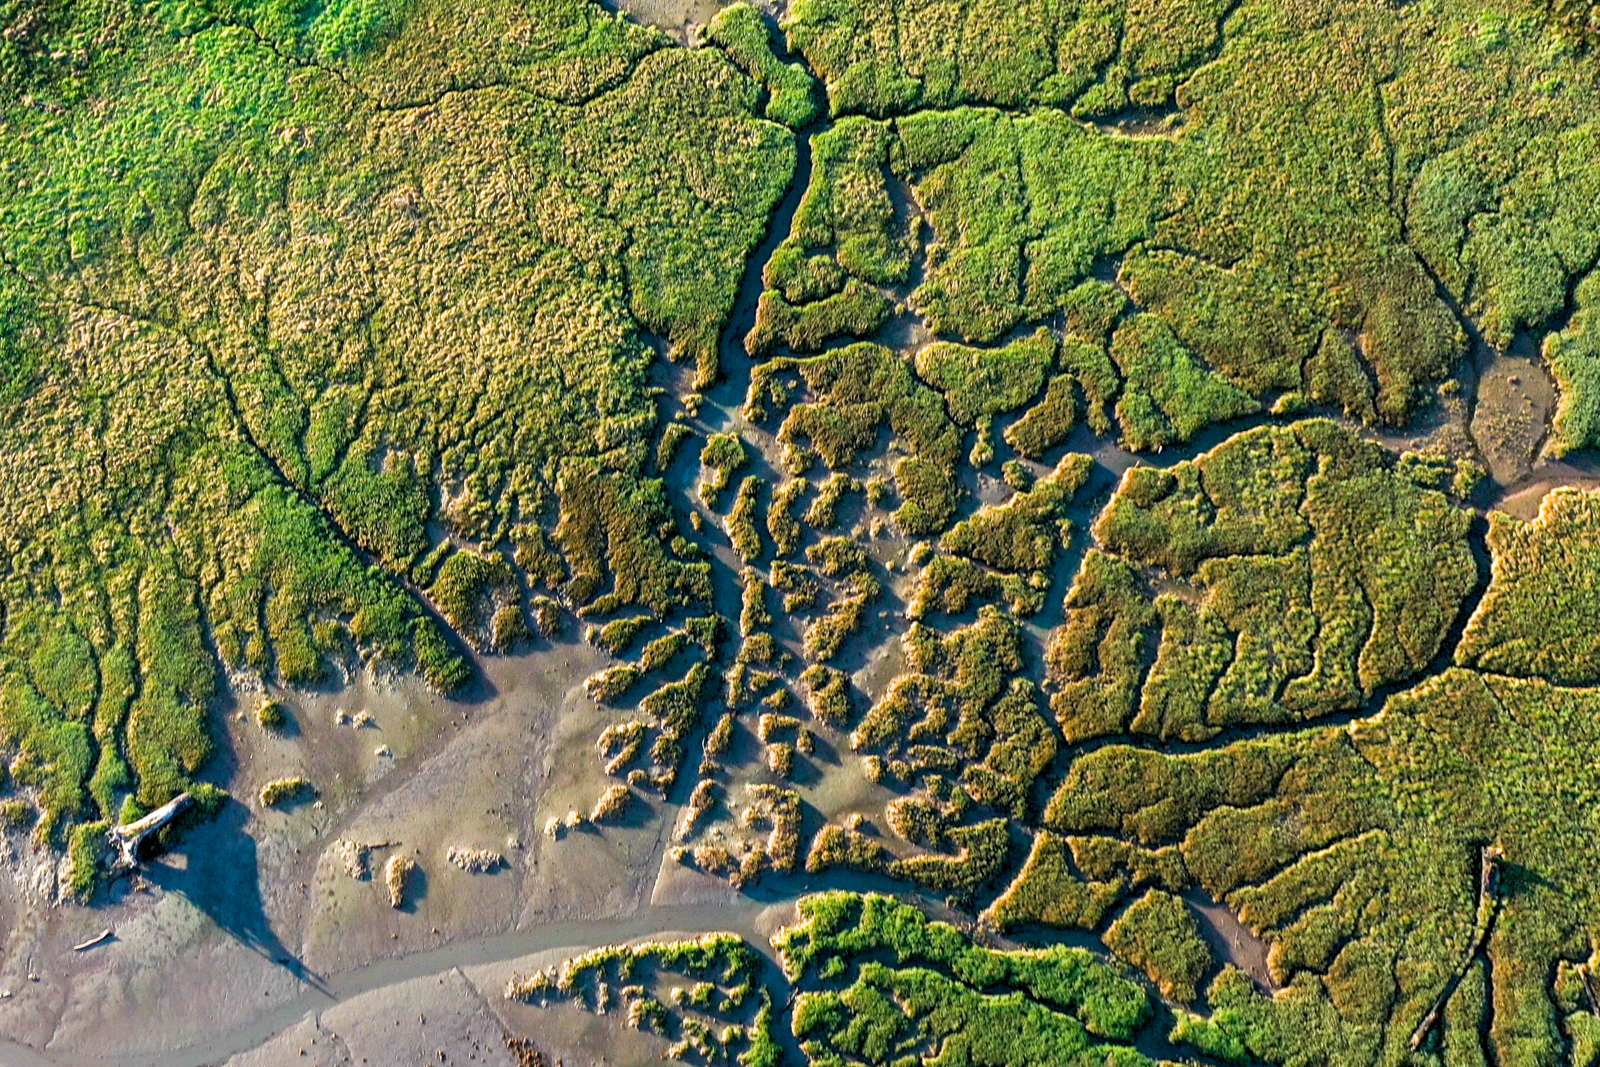 Top down view of an estuary with rivers spreading out like veins across the landscape